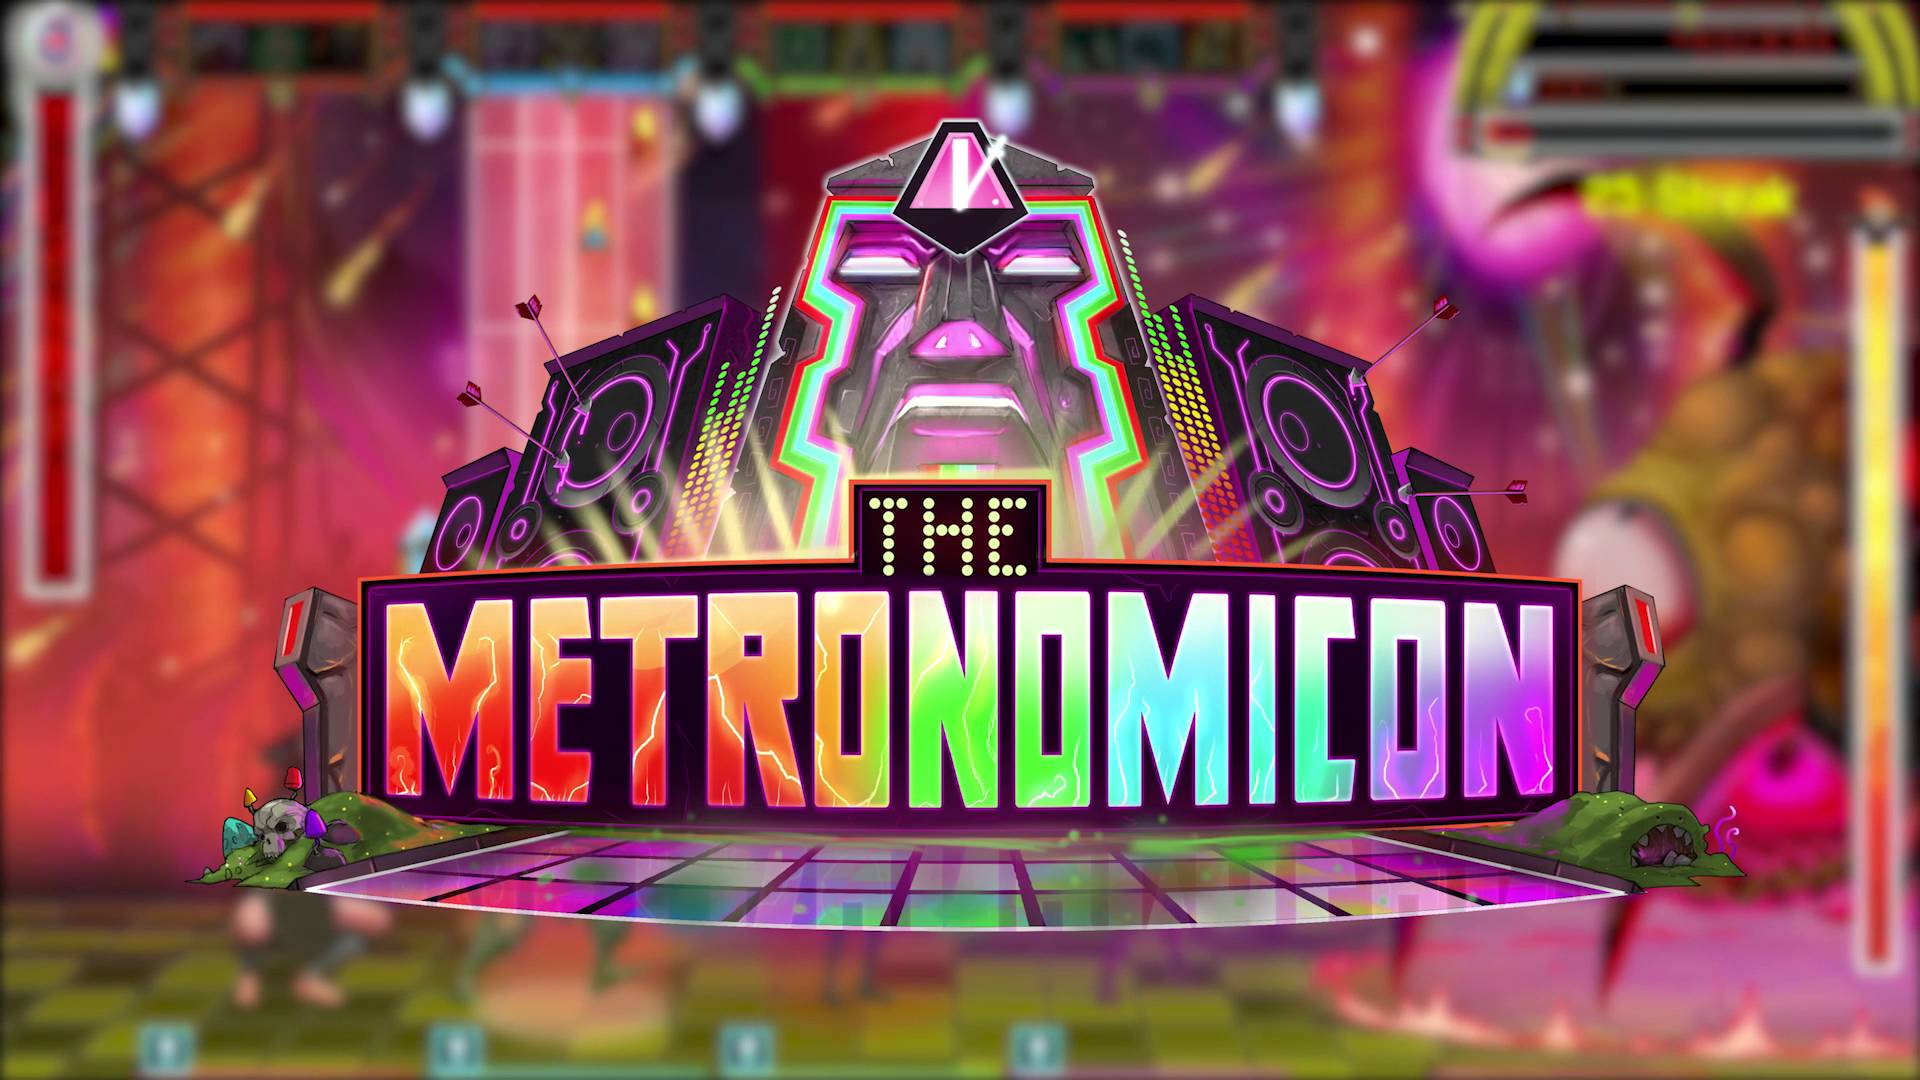 The Metronomicon download the last version for ipod